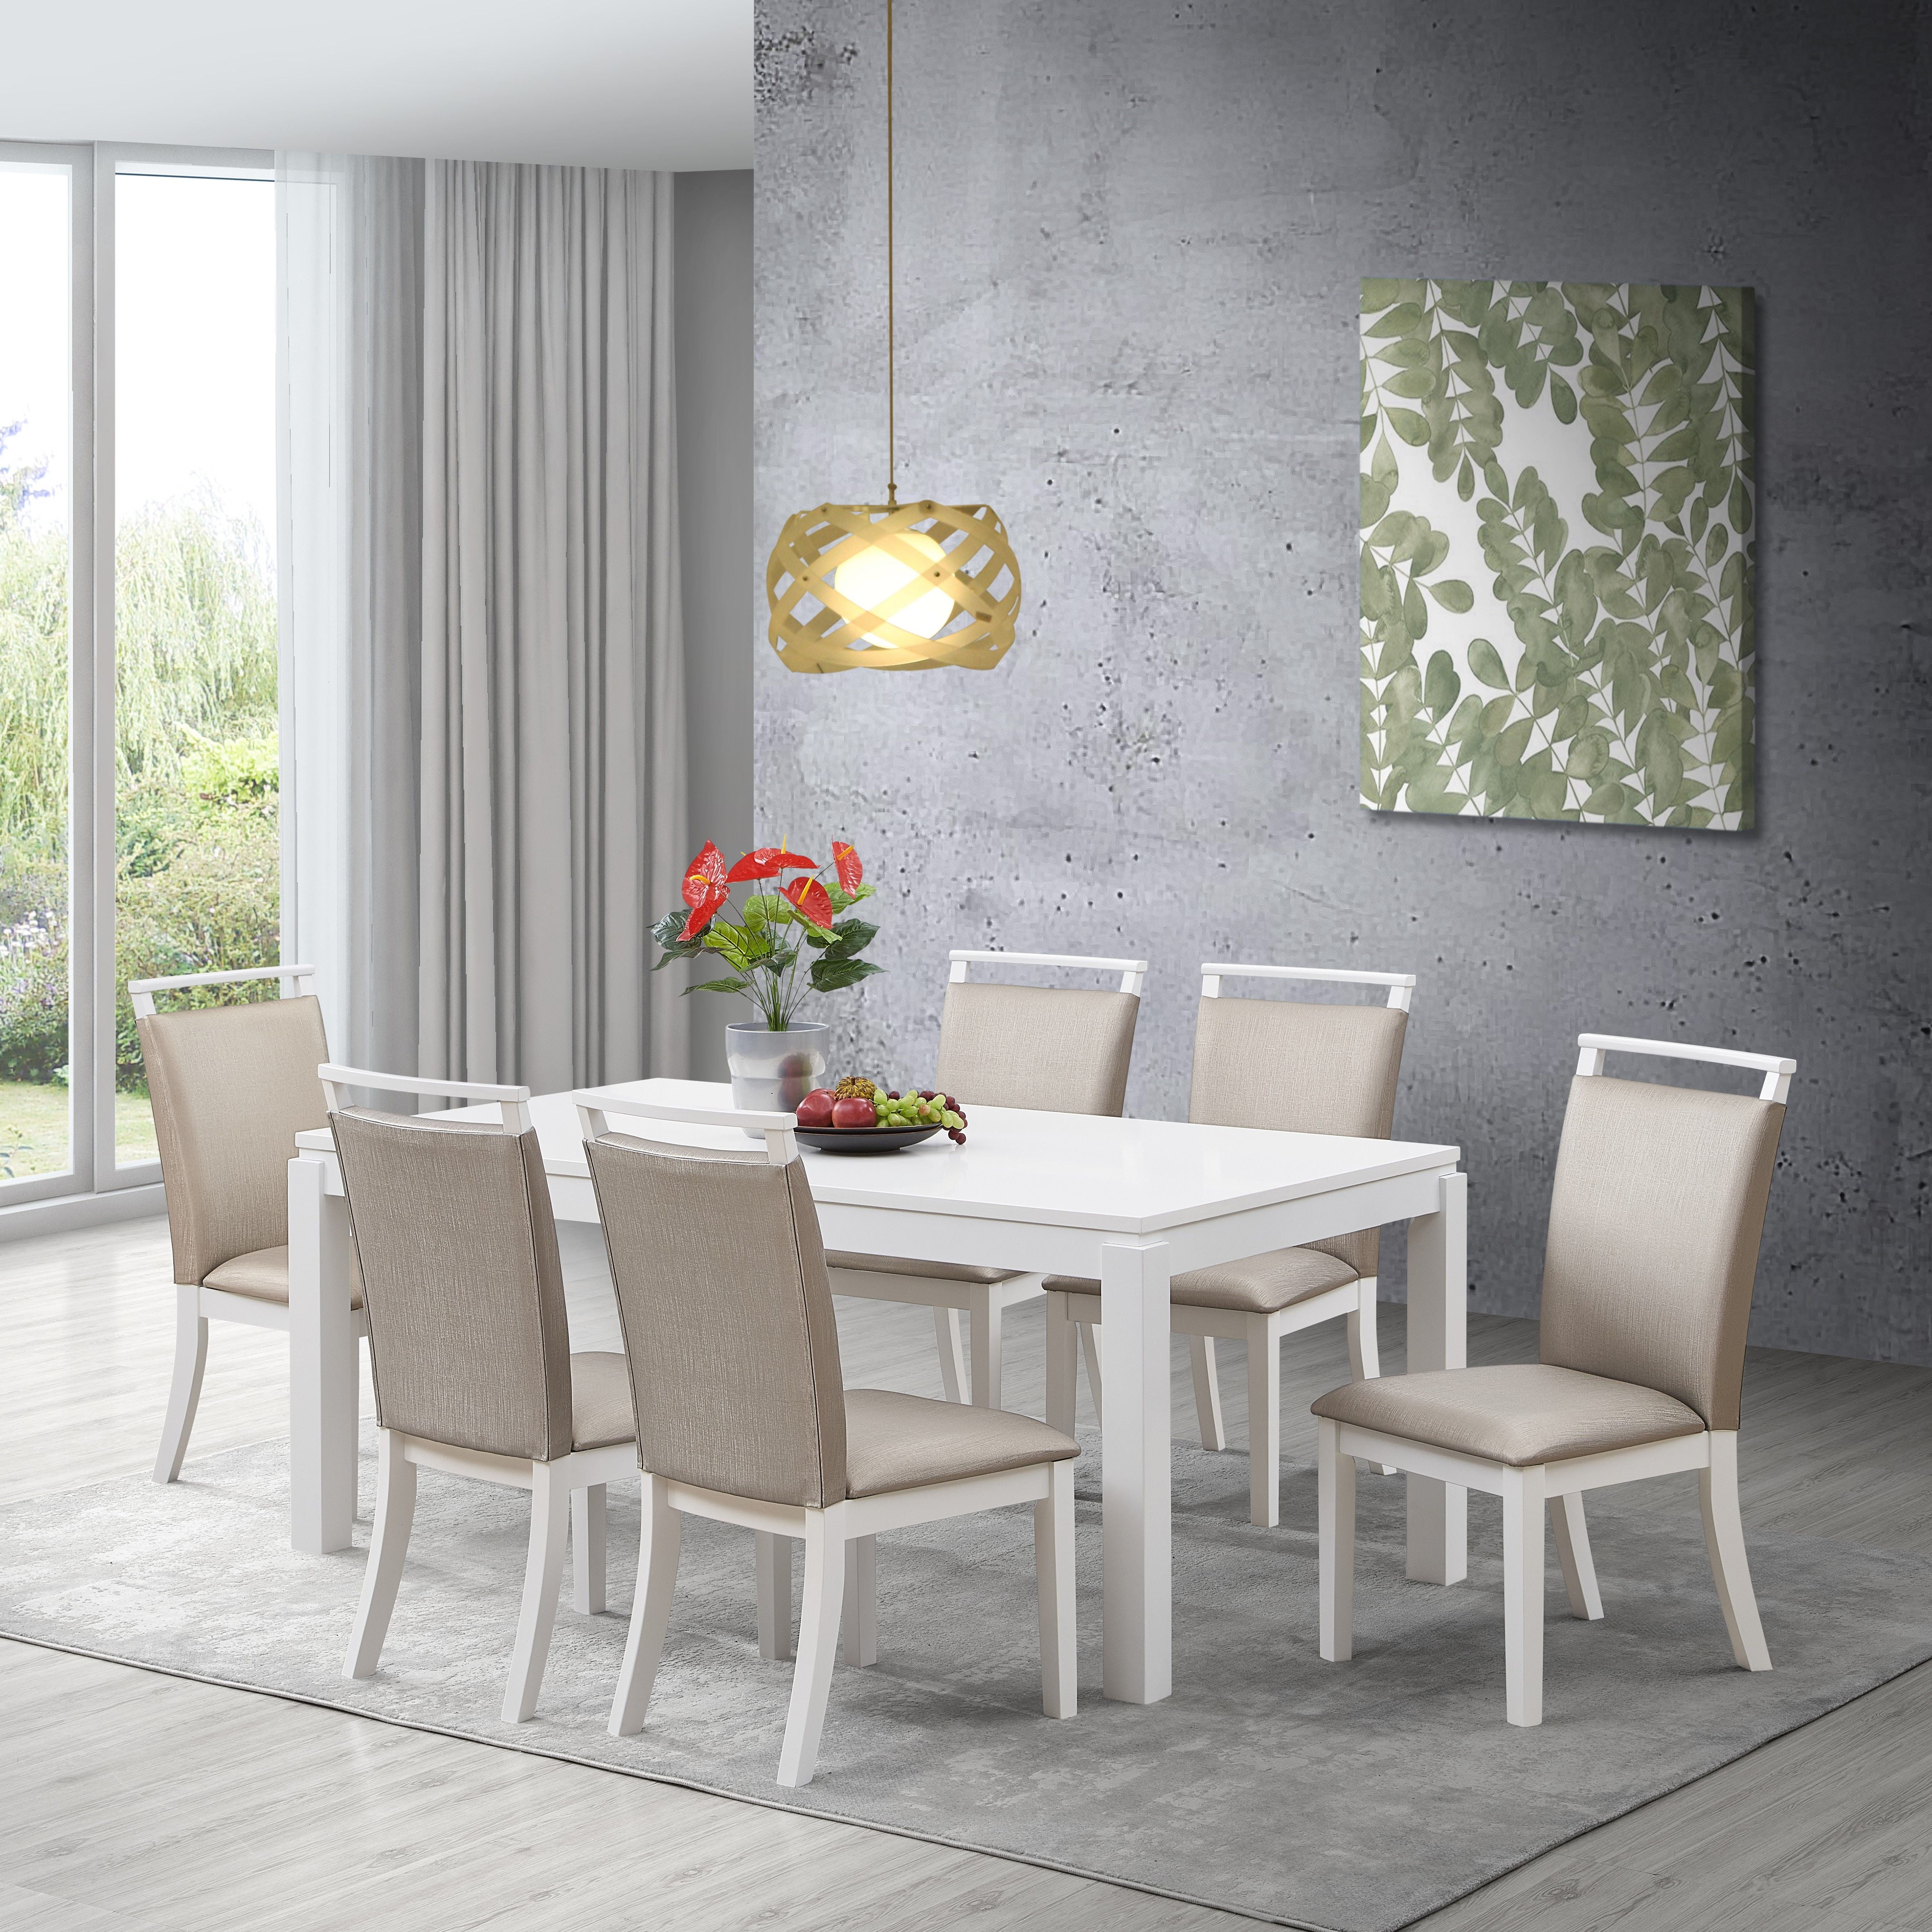 Pilaster Designs 7 Piece Dining Set, Dining Room Table And 6 Chairs Grey